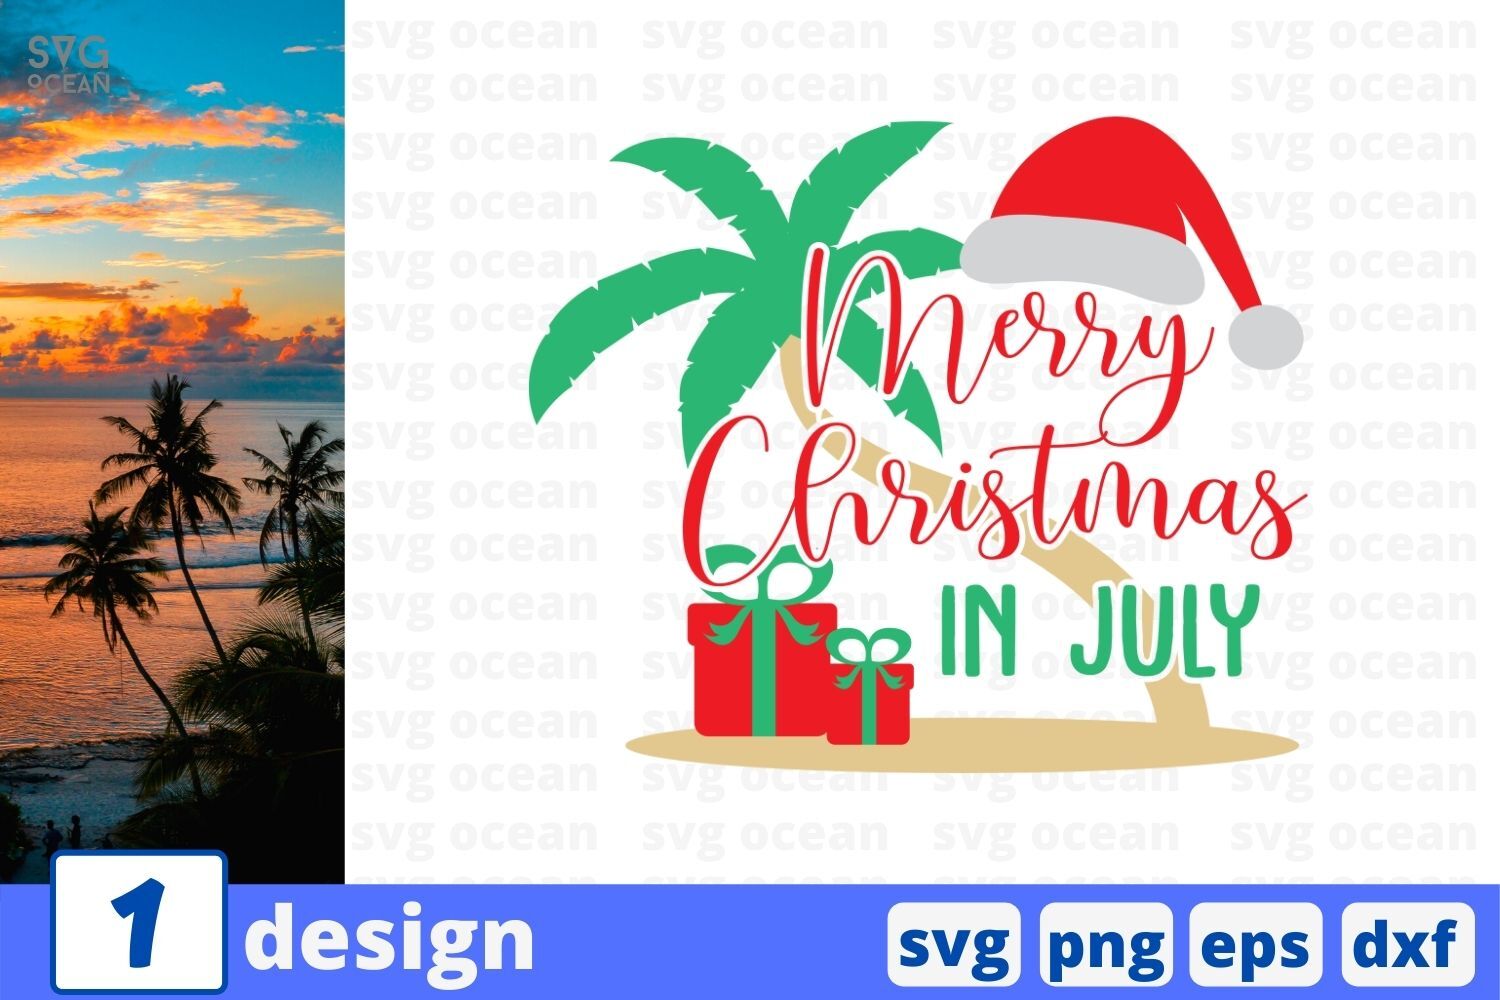 Download Merry Christmas In July Svg Cut File By Svgocean Thehungryjpeg Com